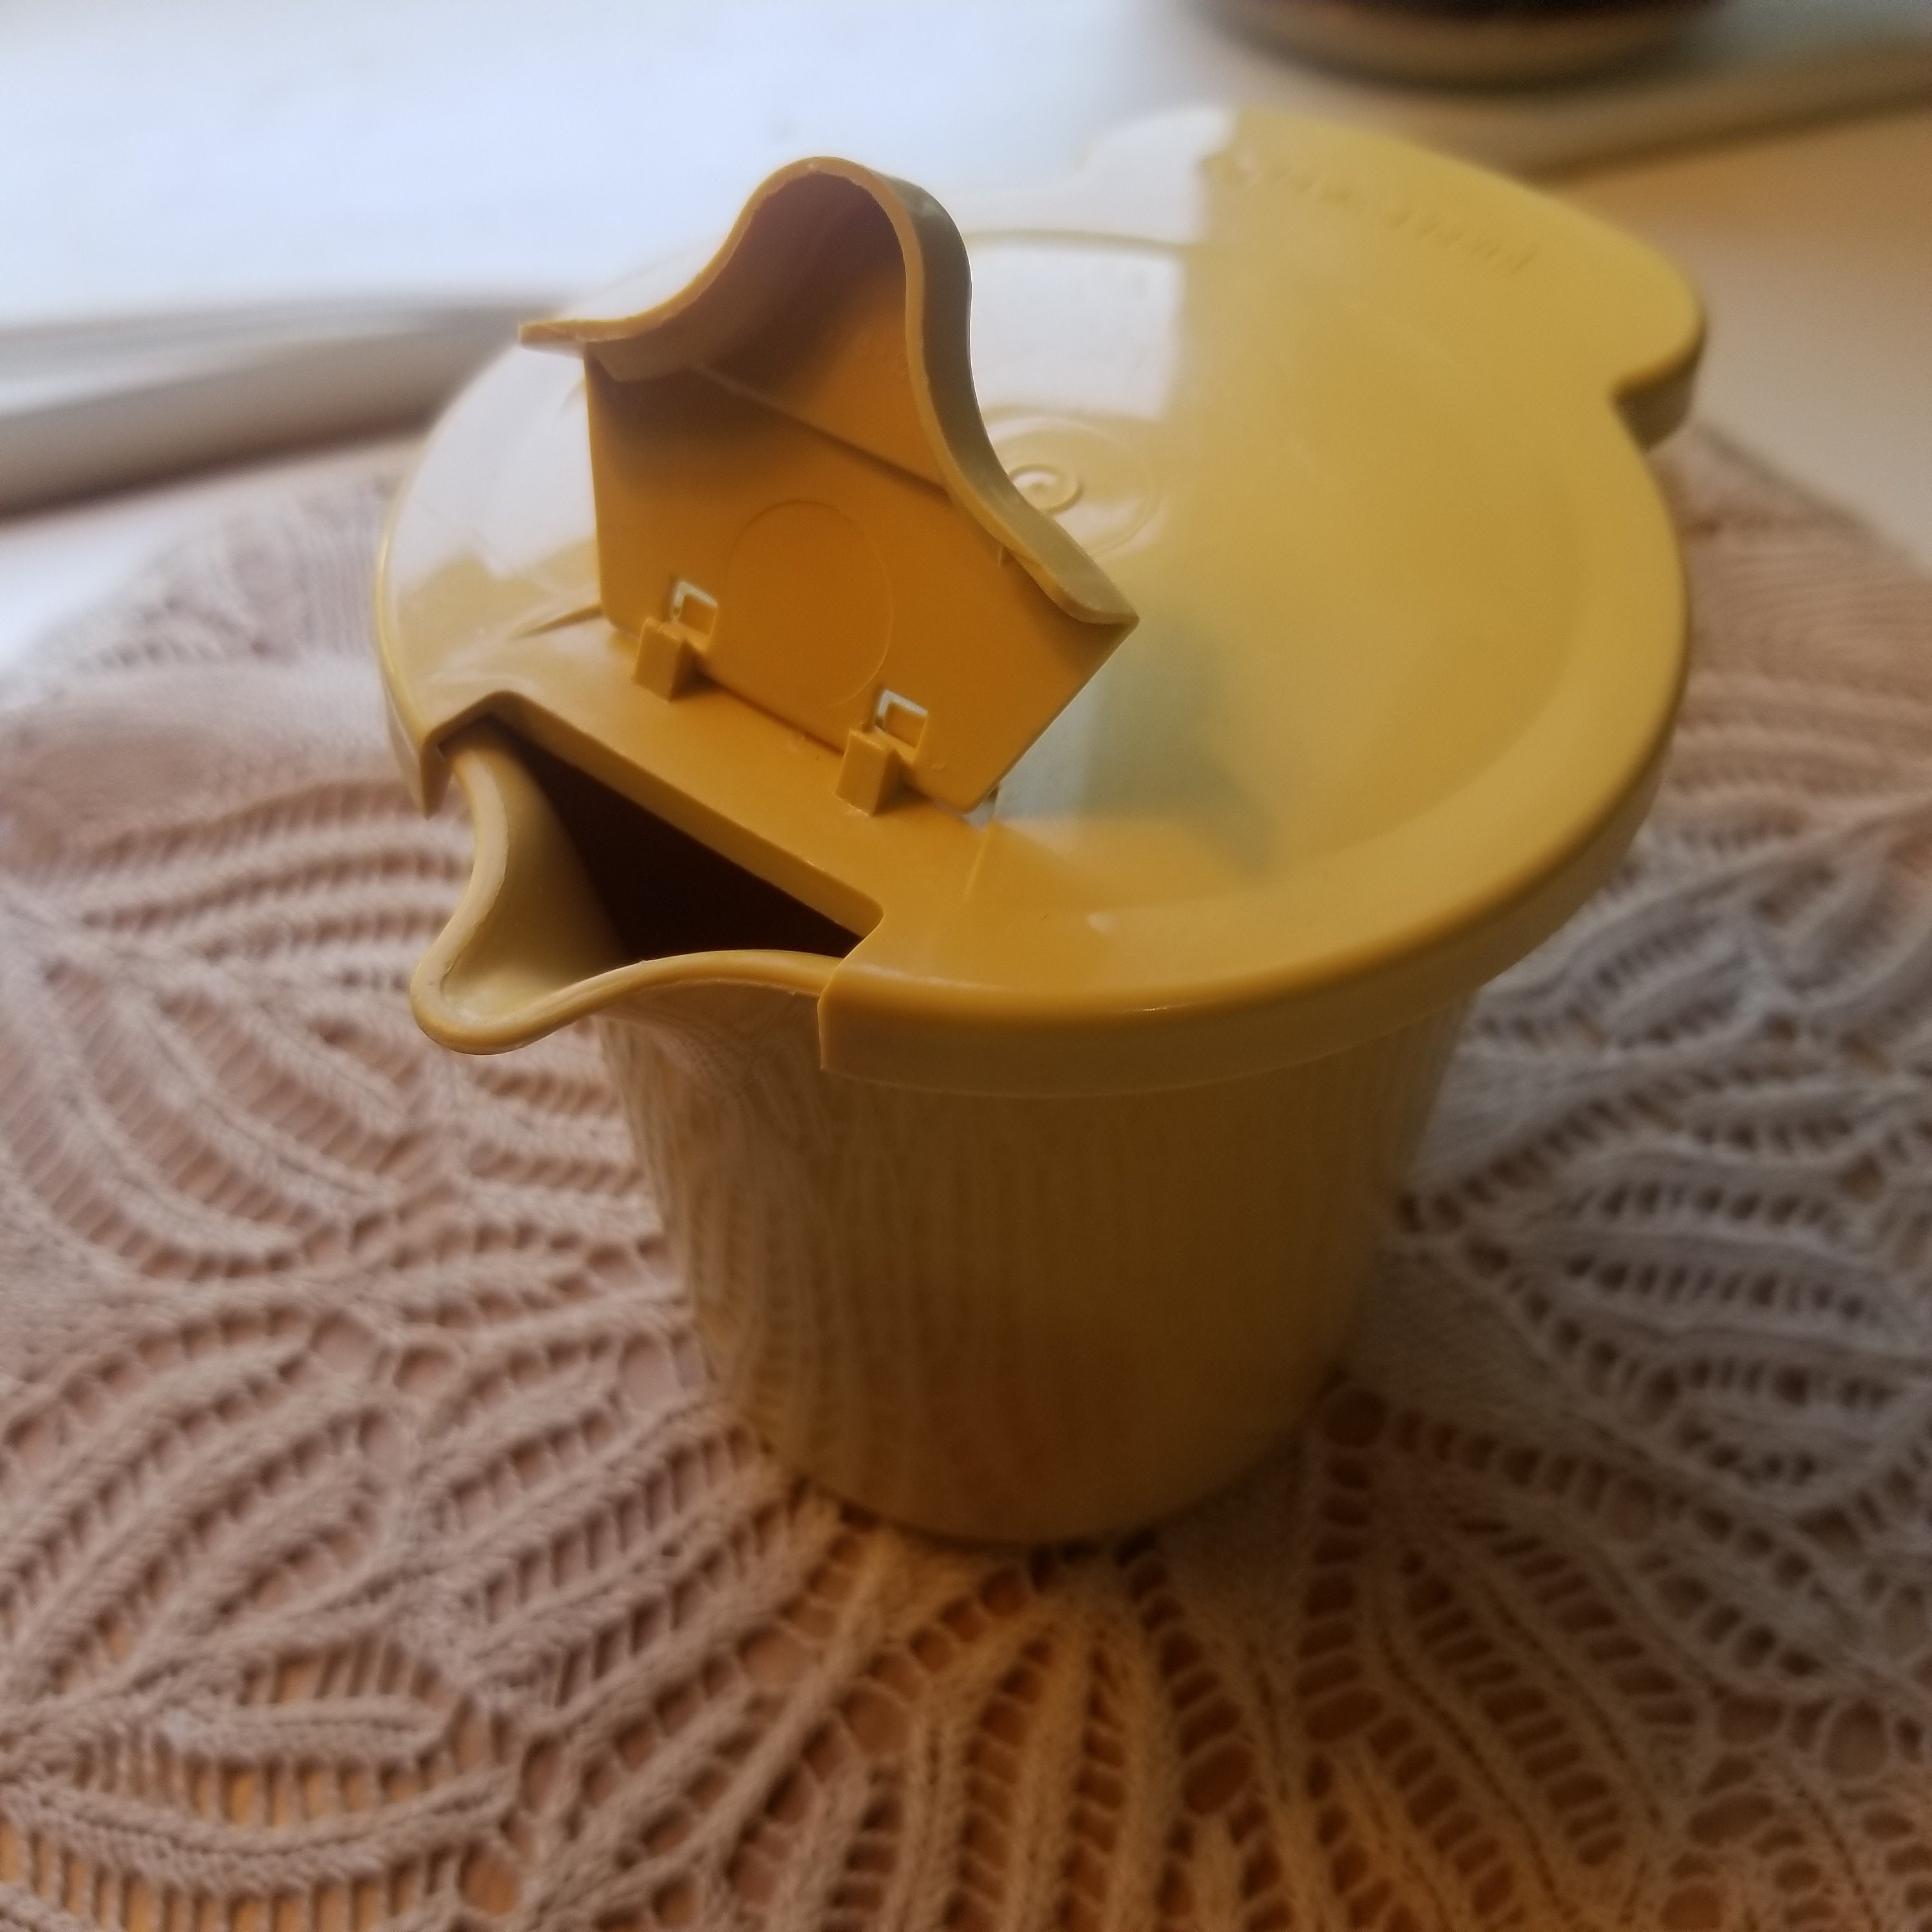 Tupperware Yellow gold Creamer Container with Flip Up Lid 574-12